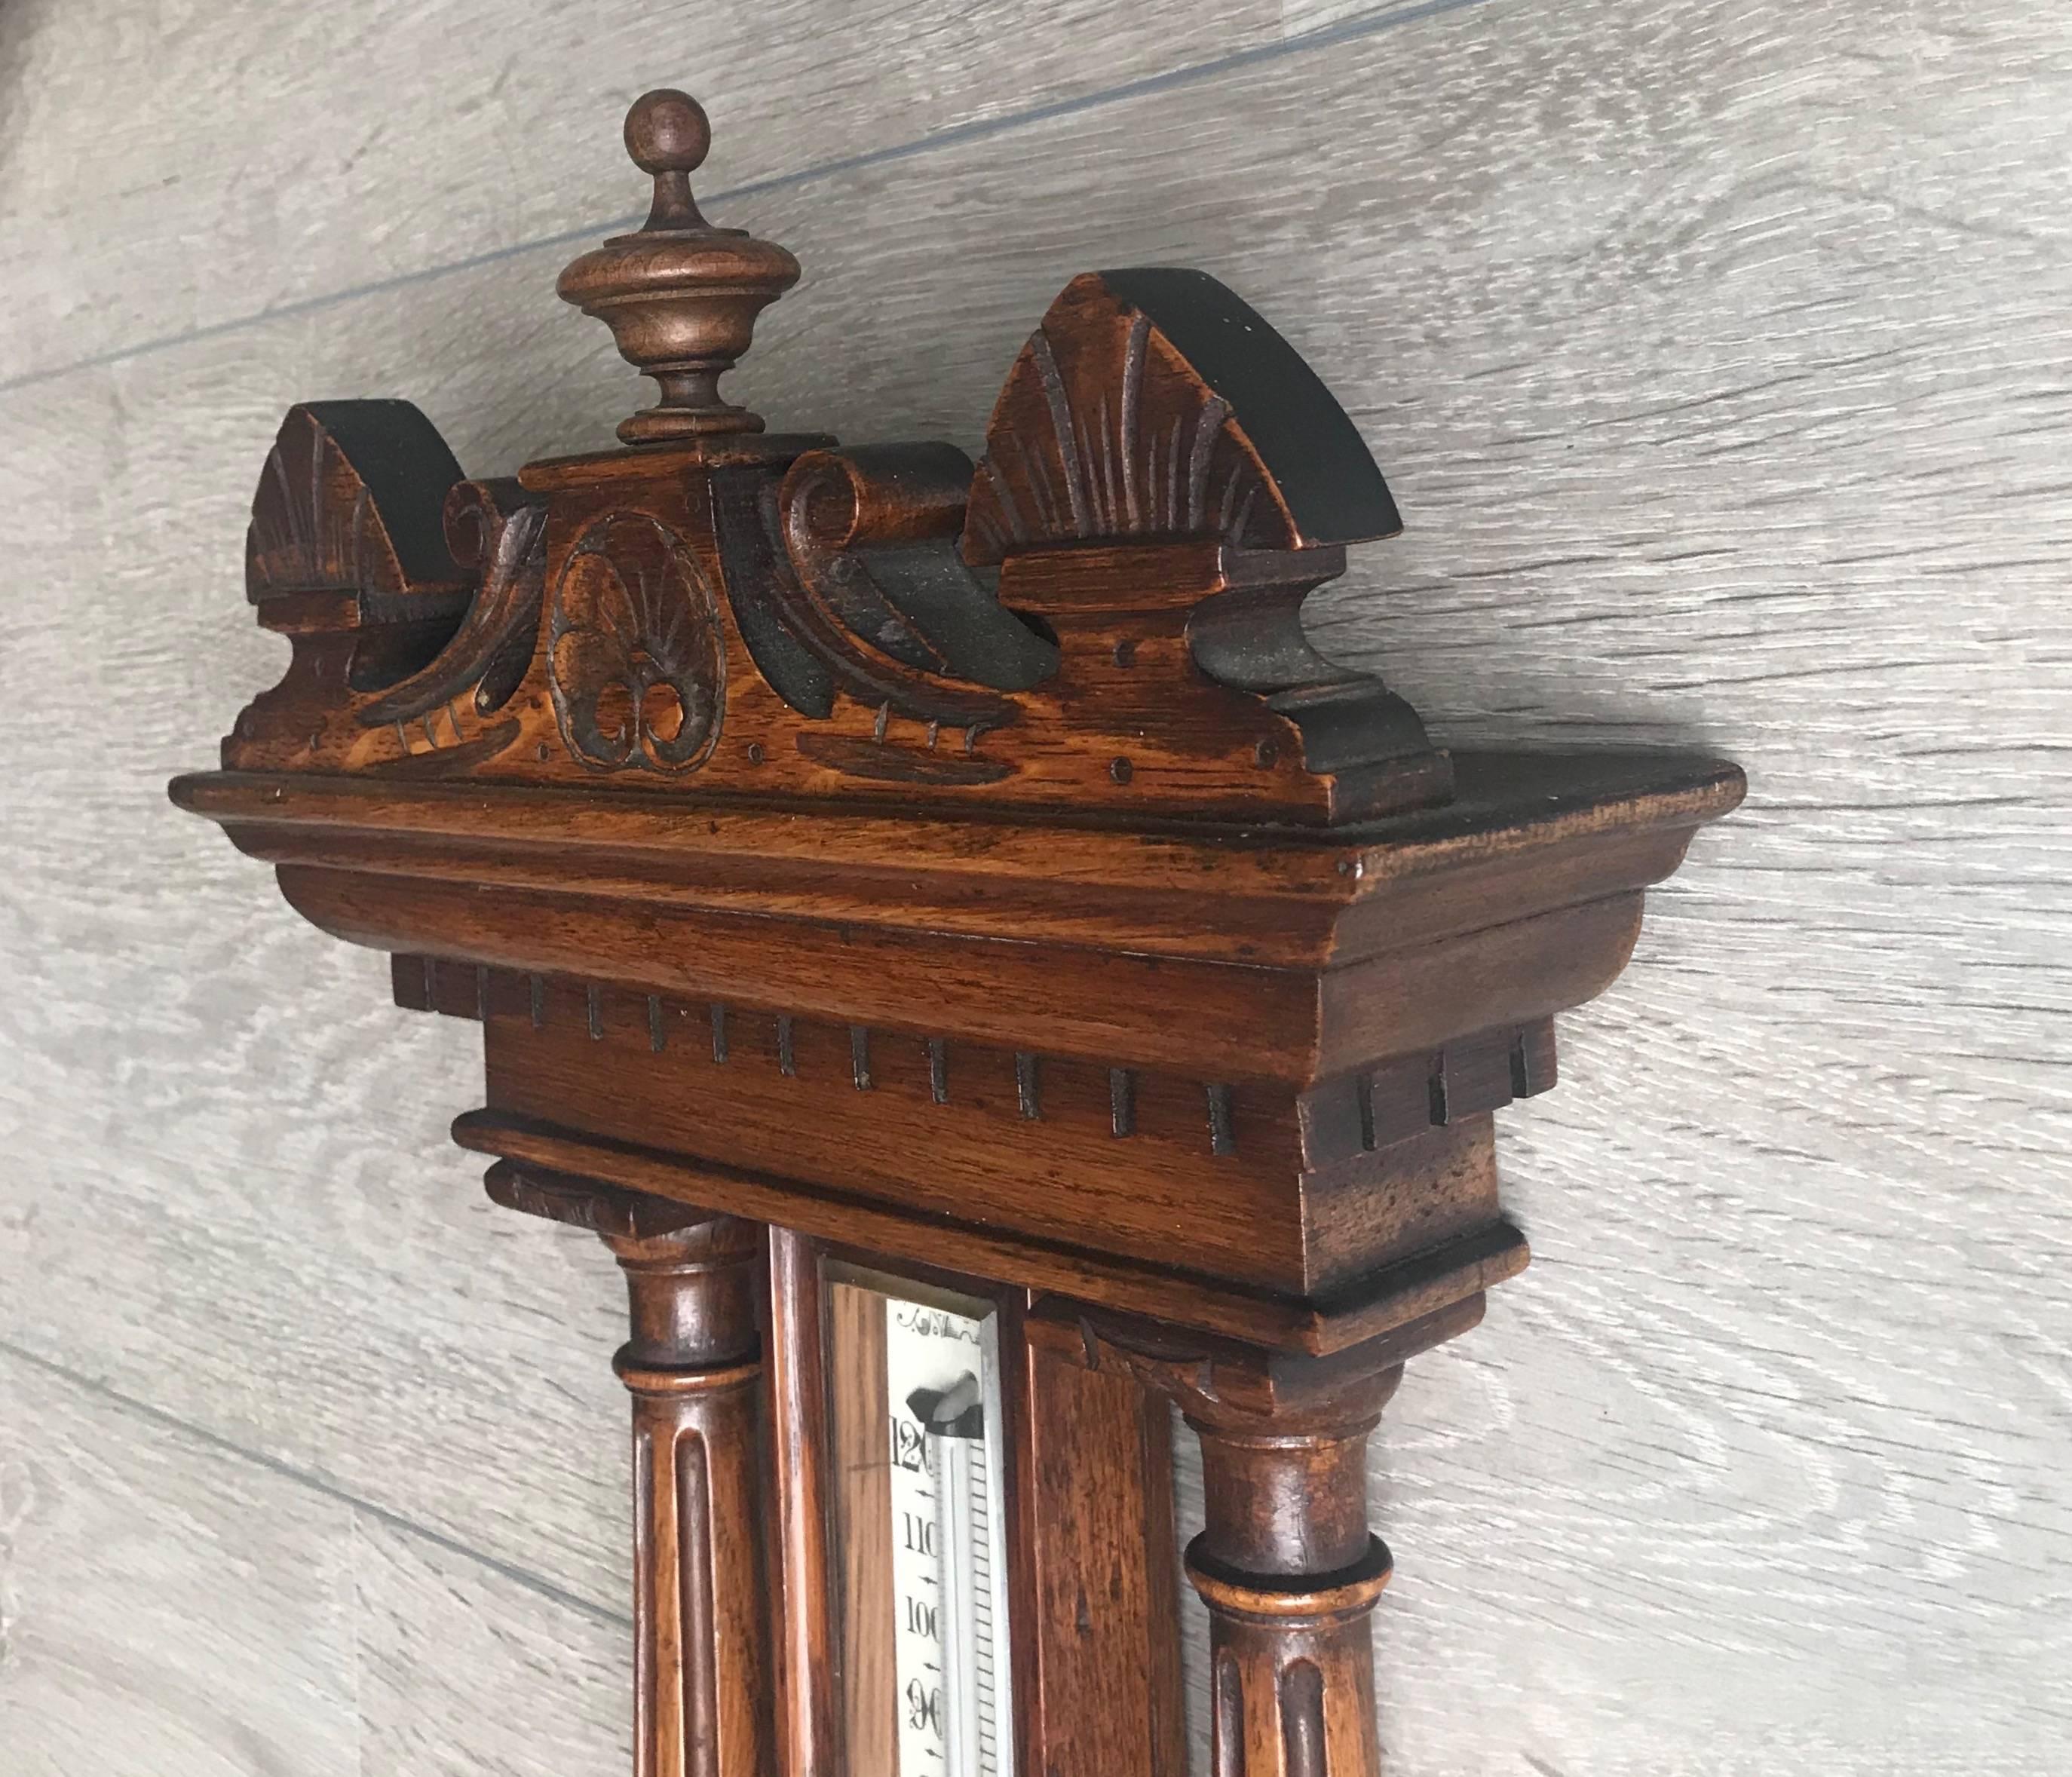 Stunning design and top quality executed antique barometer.

This late 19th to early 20th Century, English manufactured wall barometer has everything that makes an antique worthwhile. First of all, the quality of the workmanship is second to none.